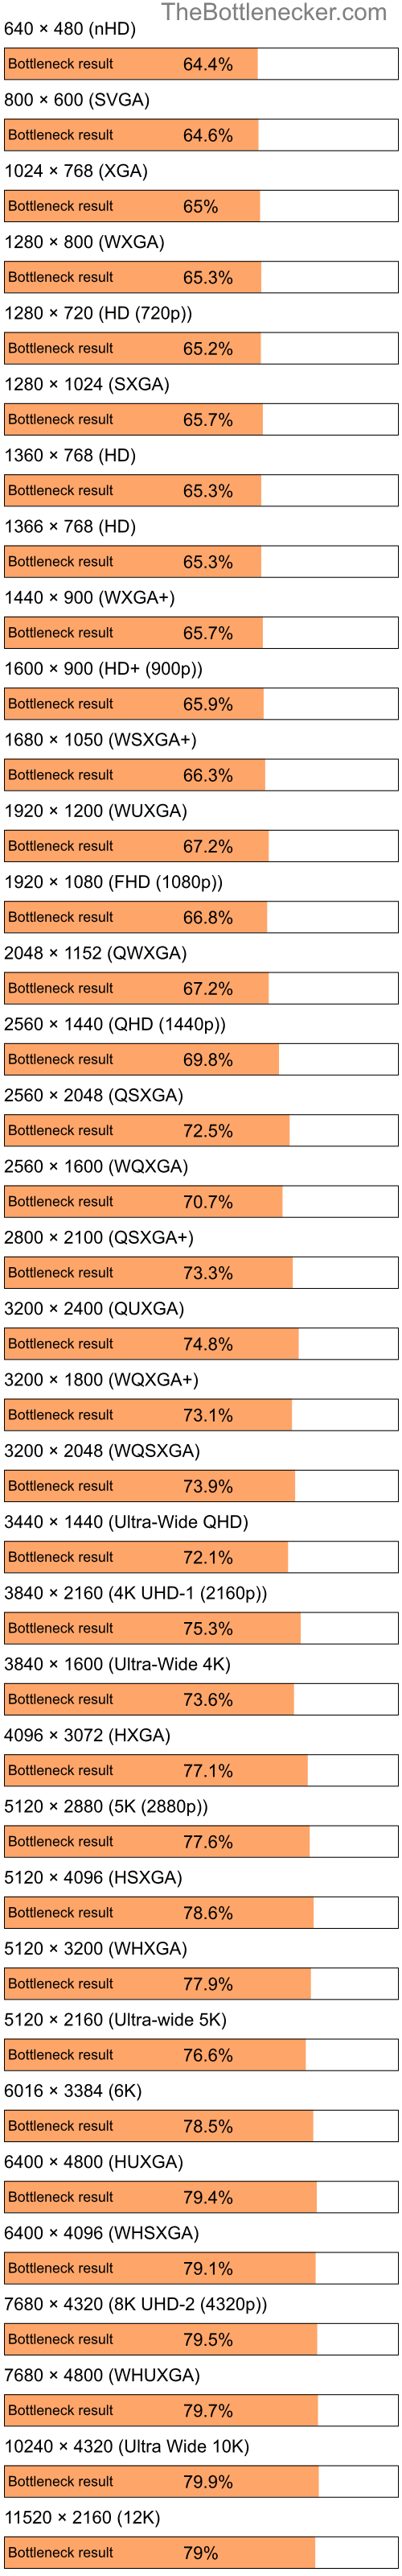 Bottleneck results by resolution for Intel Pentium 4 and NVIDIA GeForce 8200M G in Processor Intense Tasks